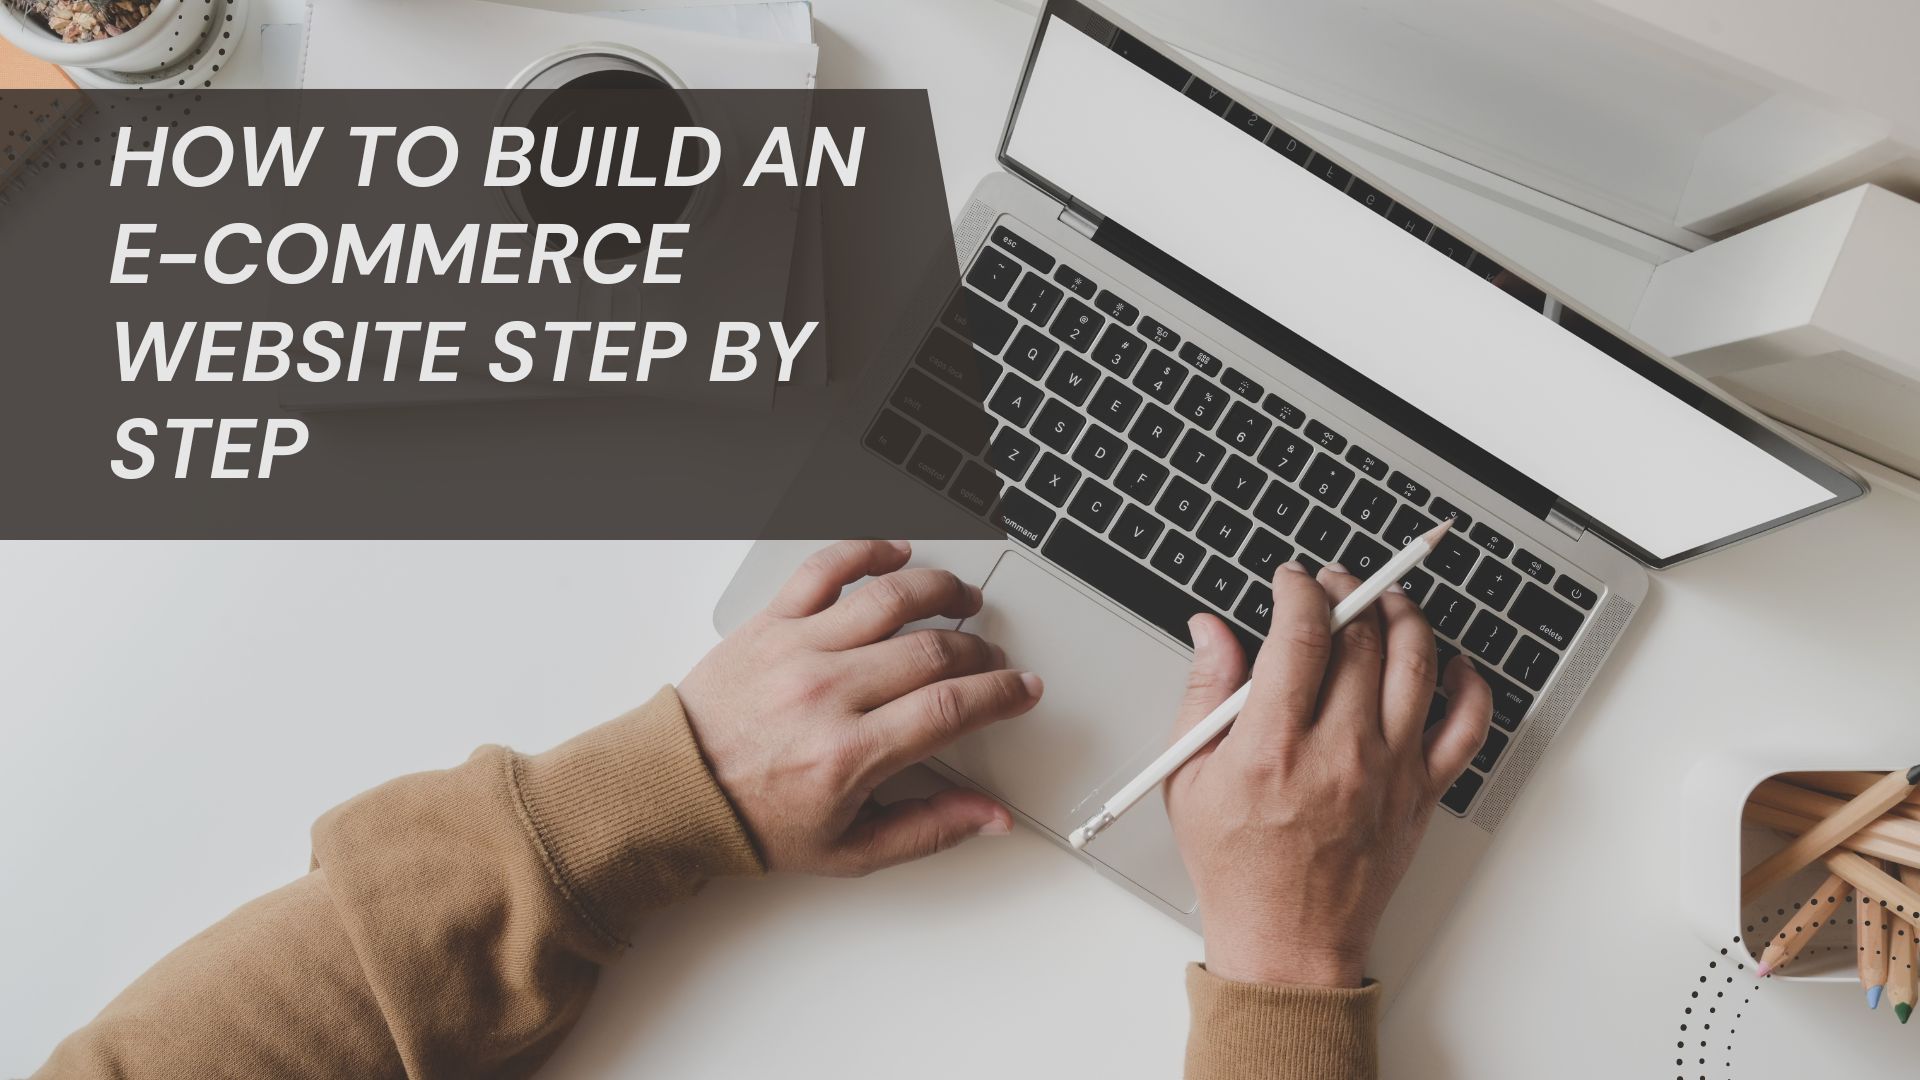 How to Build an E-Commerce Website Step by Step